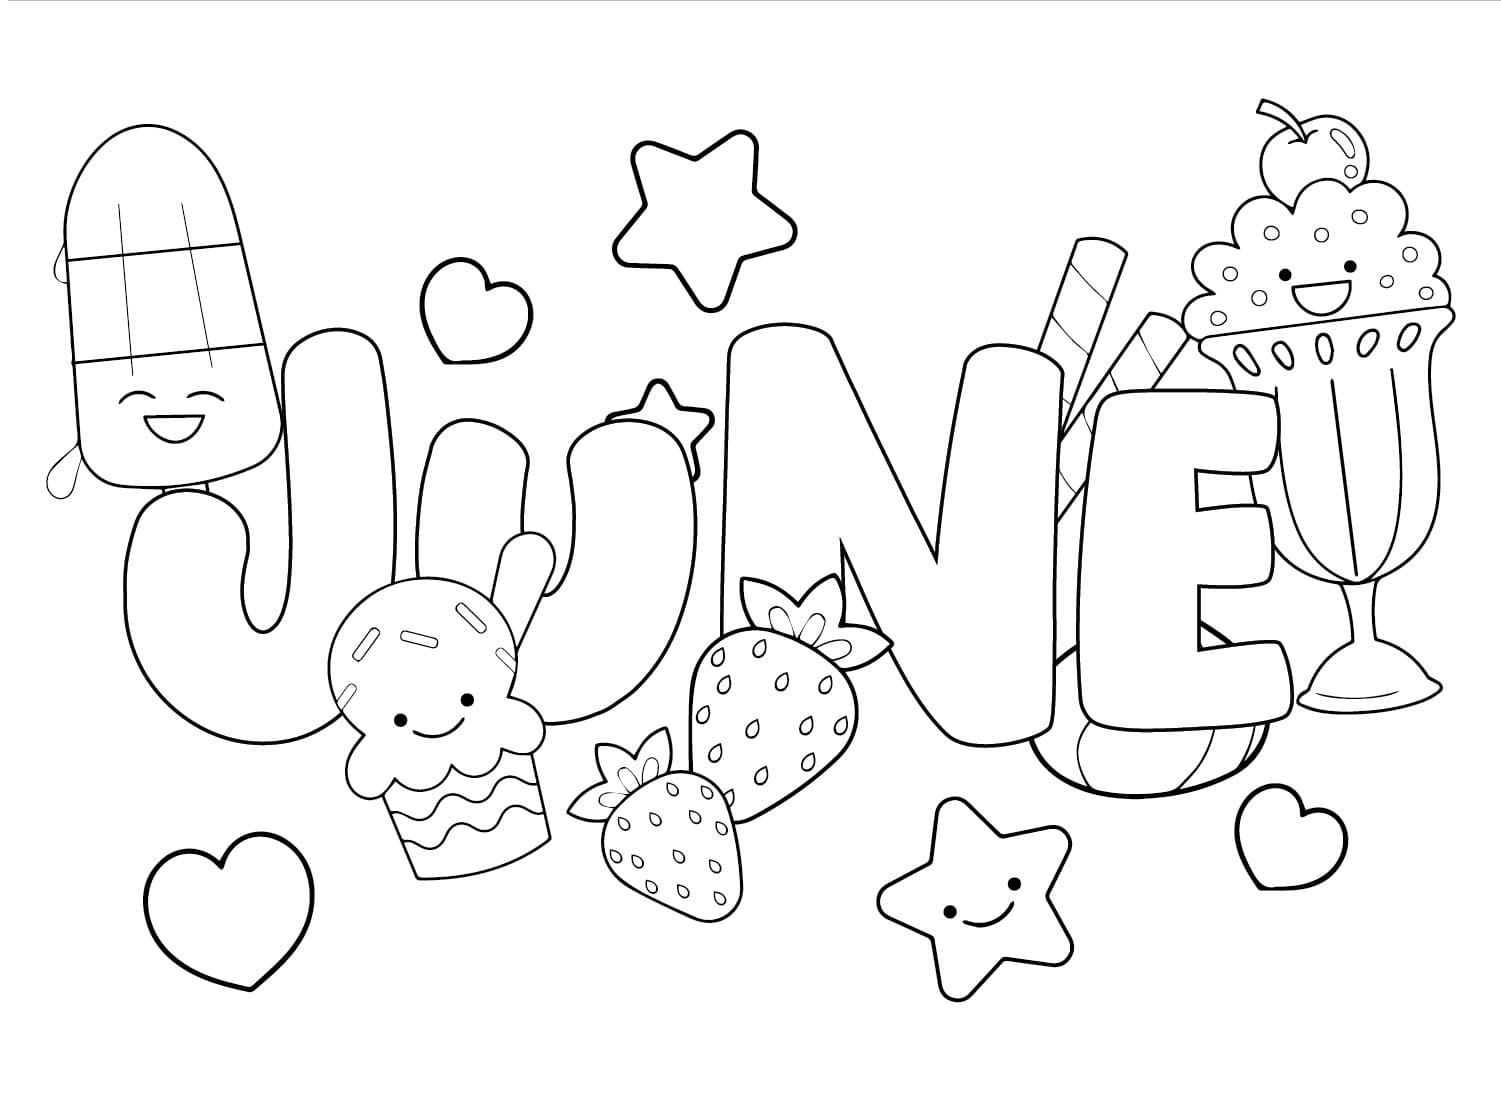 June Free coloring page - Download, Print or Color Online for Free